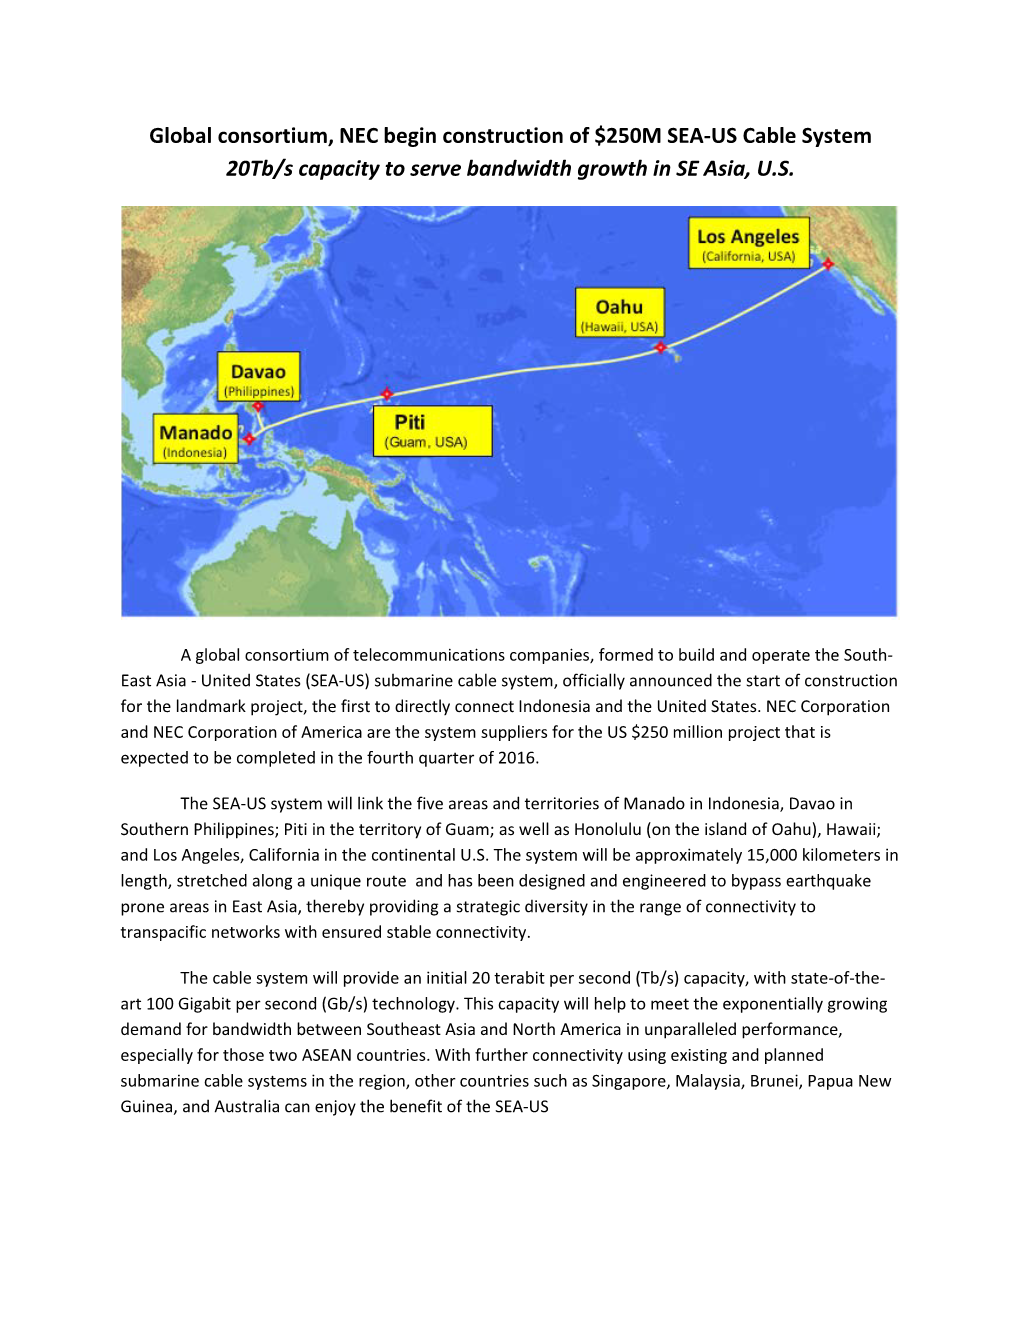 Global Consortium, NEC Begin Construction of $250M SEA-US Cable System 20Tb/S Capacity to Serve Bandwidth Growth in SE Asia, U.S